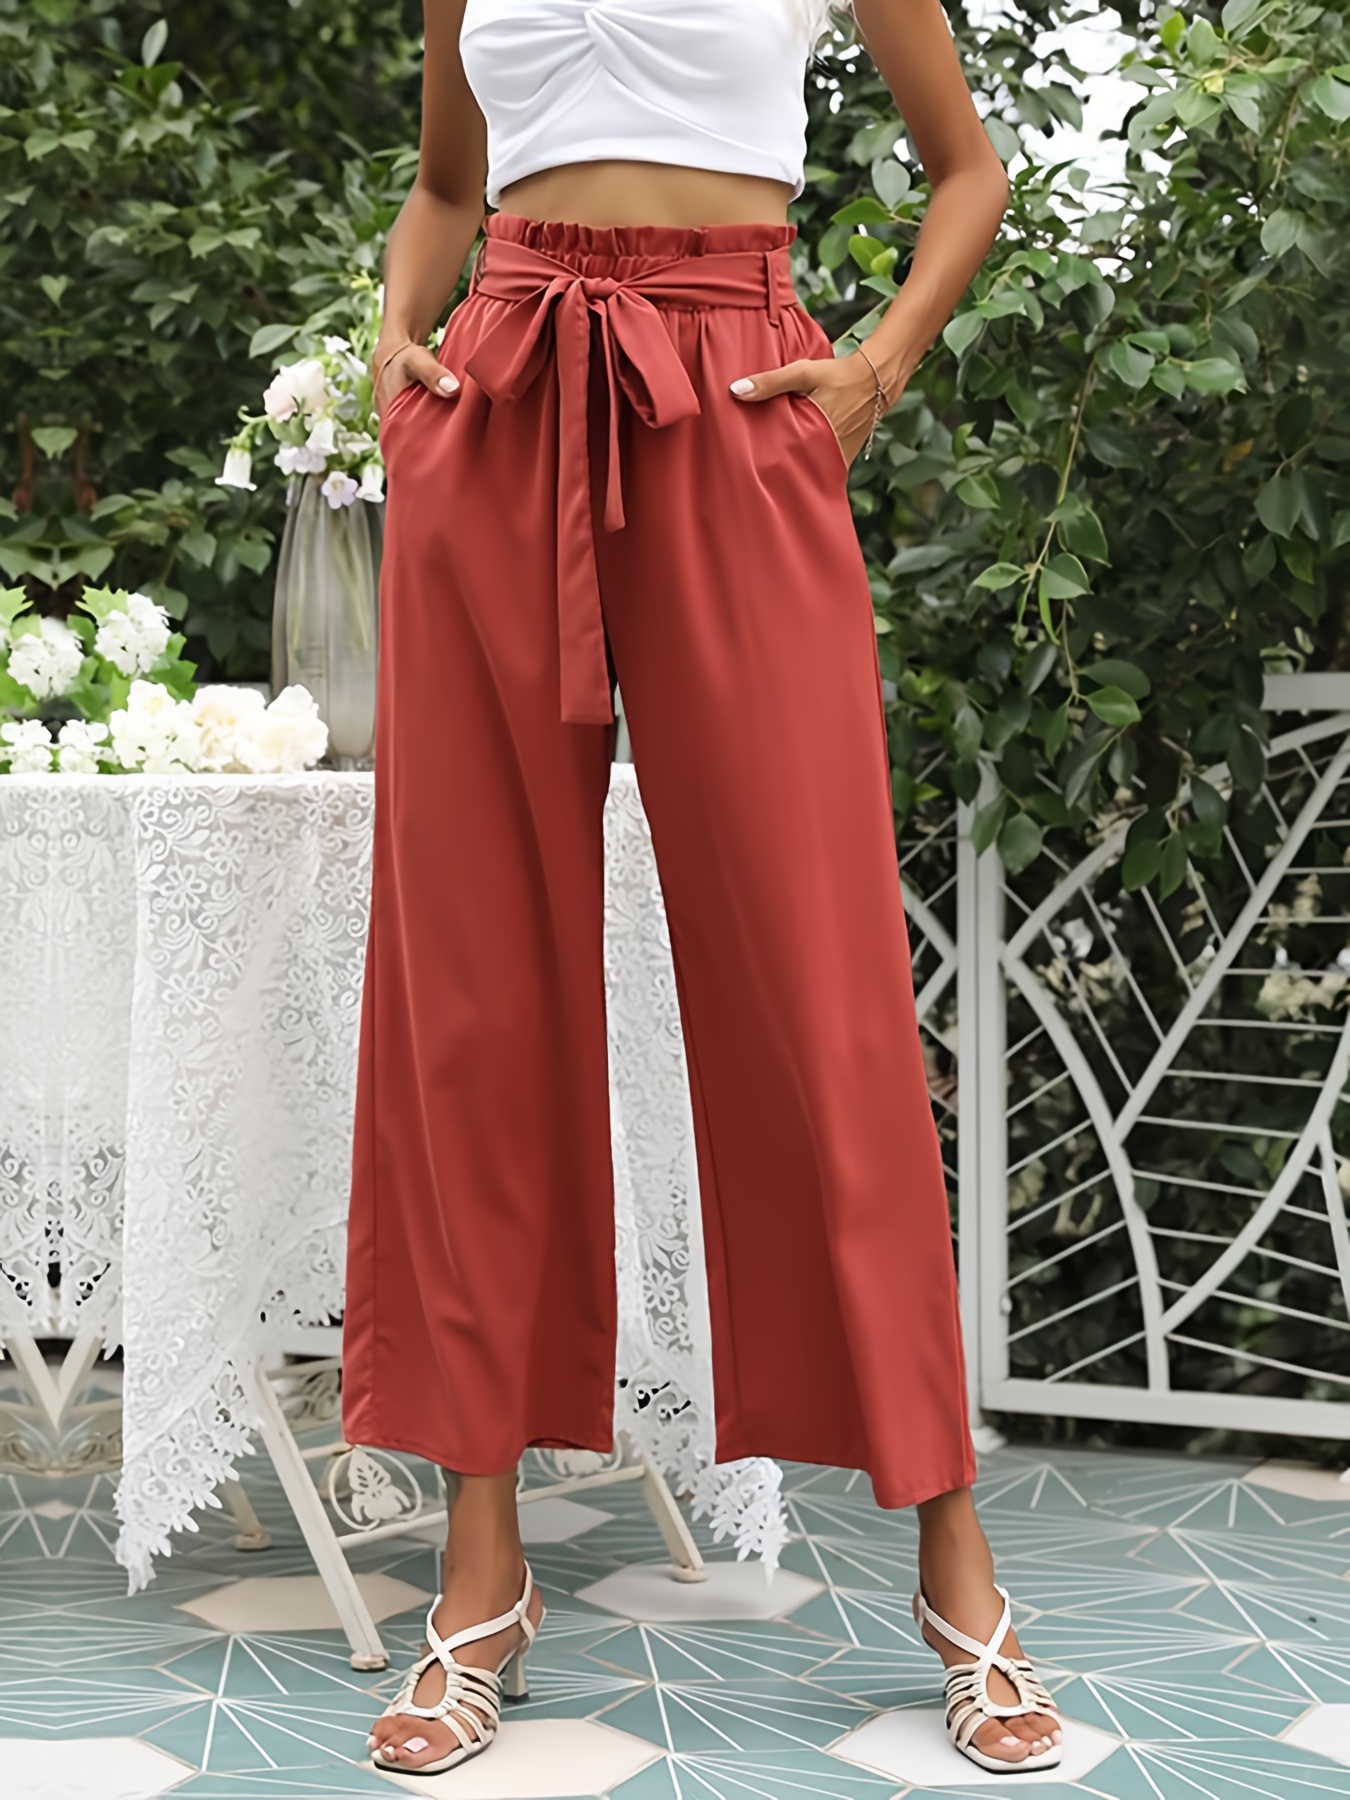 FUAIOKT Bohemian Wide Leg Pants for Women Comfy Boho Floral Print Belted  High Waisted Loose Casual Beach Palazzo Pants Red at  Women's  Clothing store